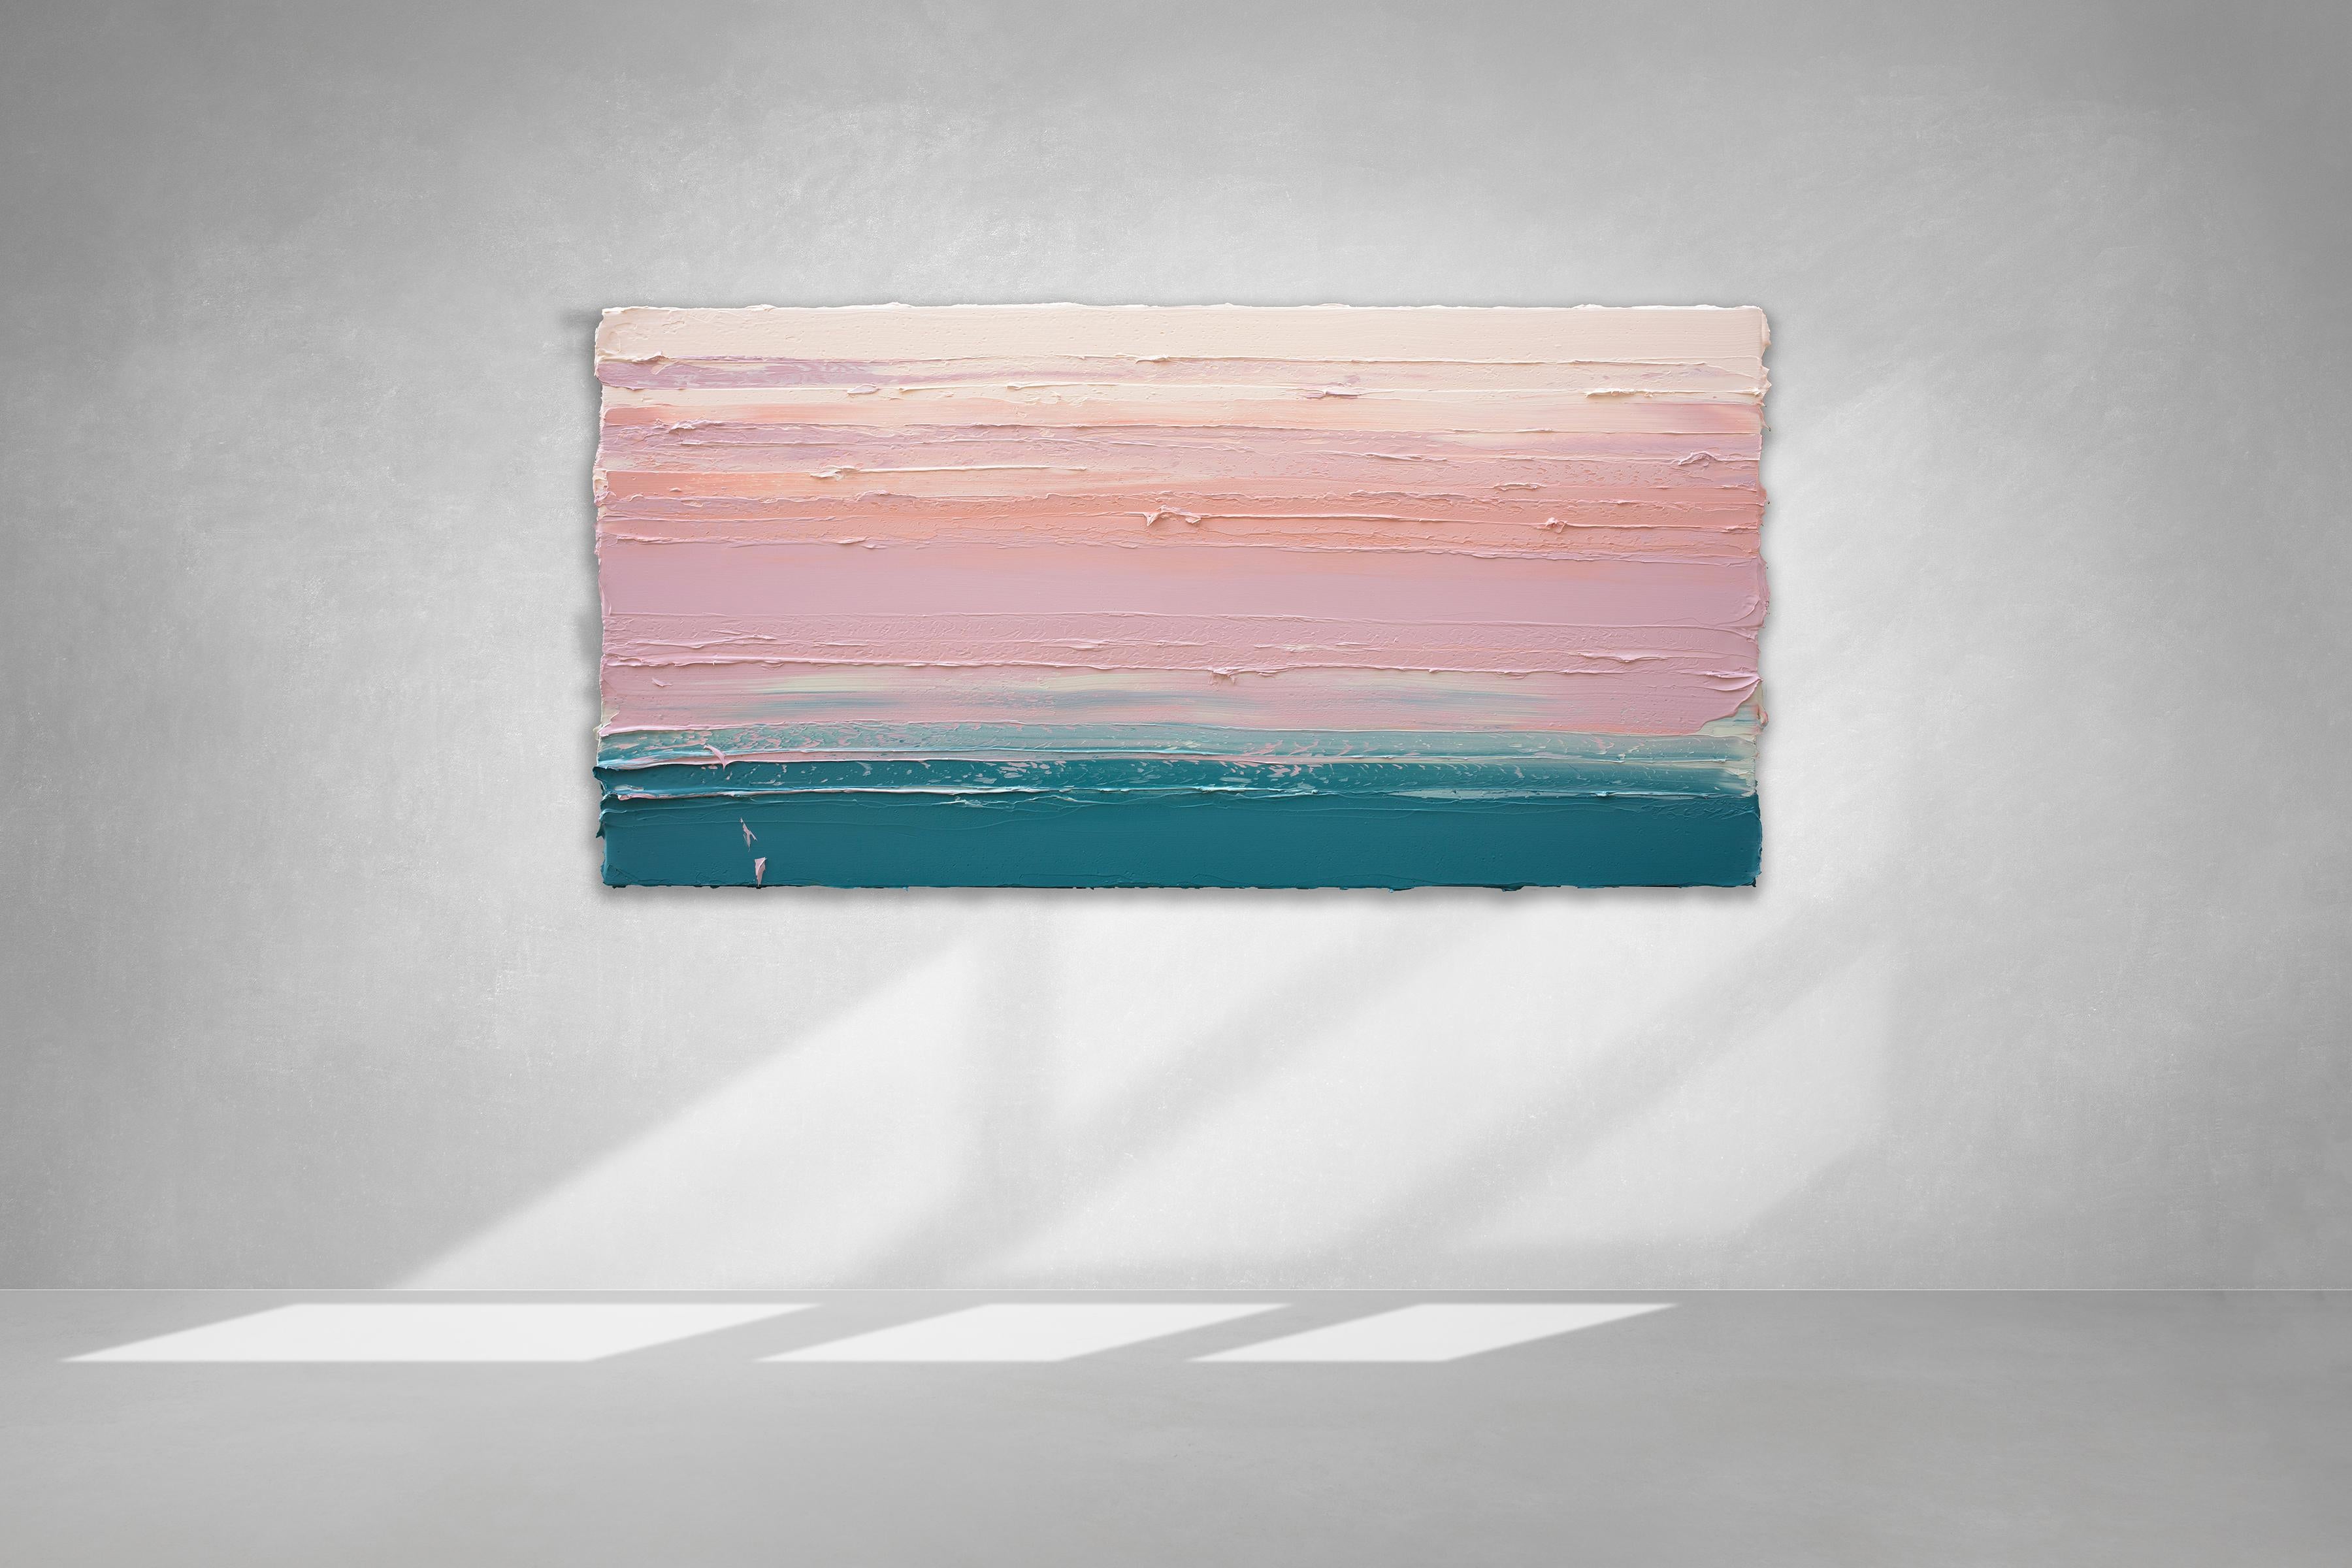 This abstract painting by Teodora Guererra features a deep teal and pink palette. The artist layers thick strokes of paint using a palette knife in broad, horizontal sweeping strokes over gallery wrapped canvas, creating an energetic composition and